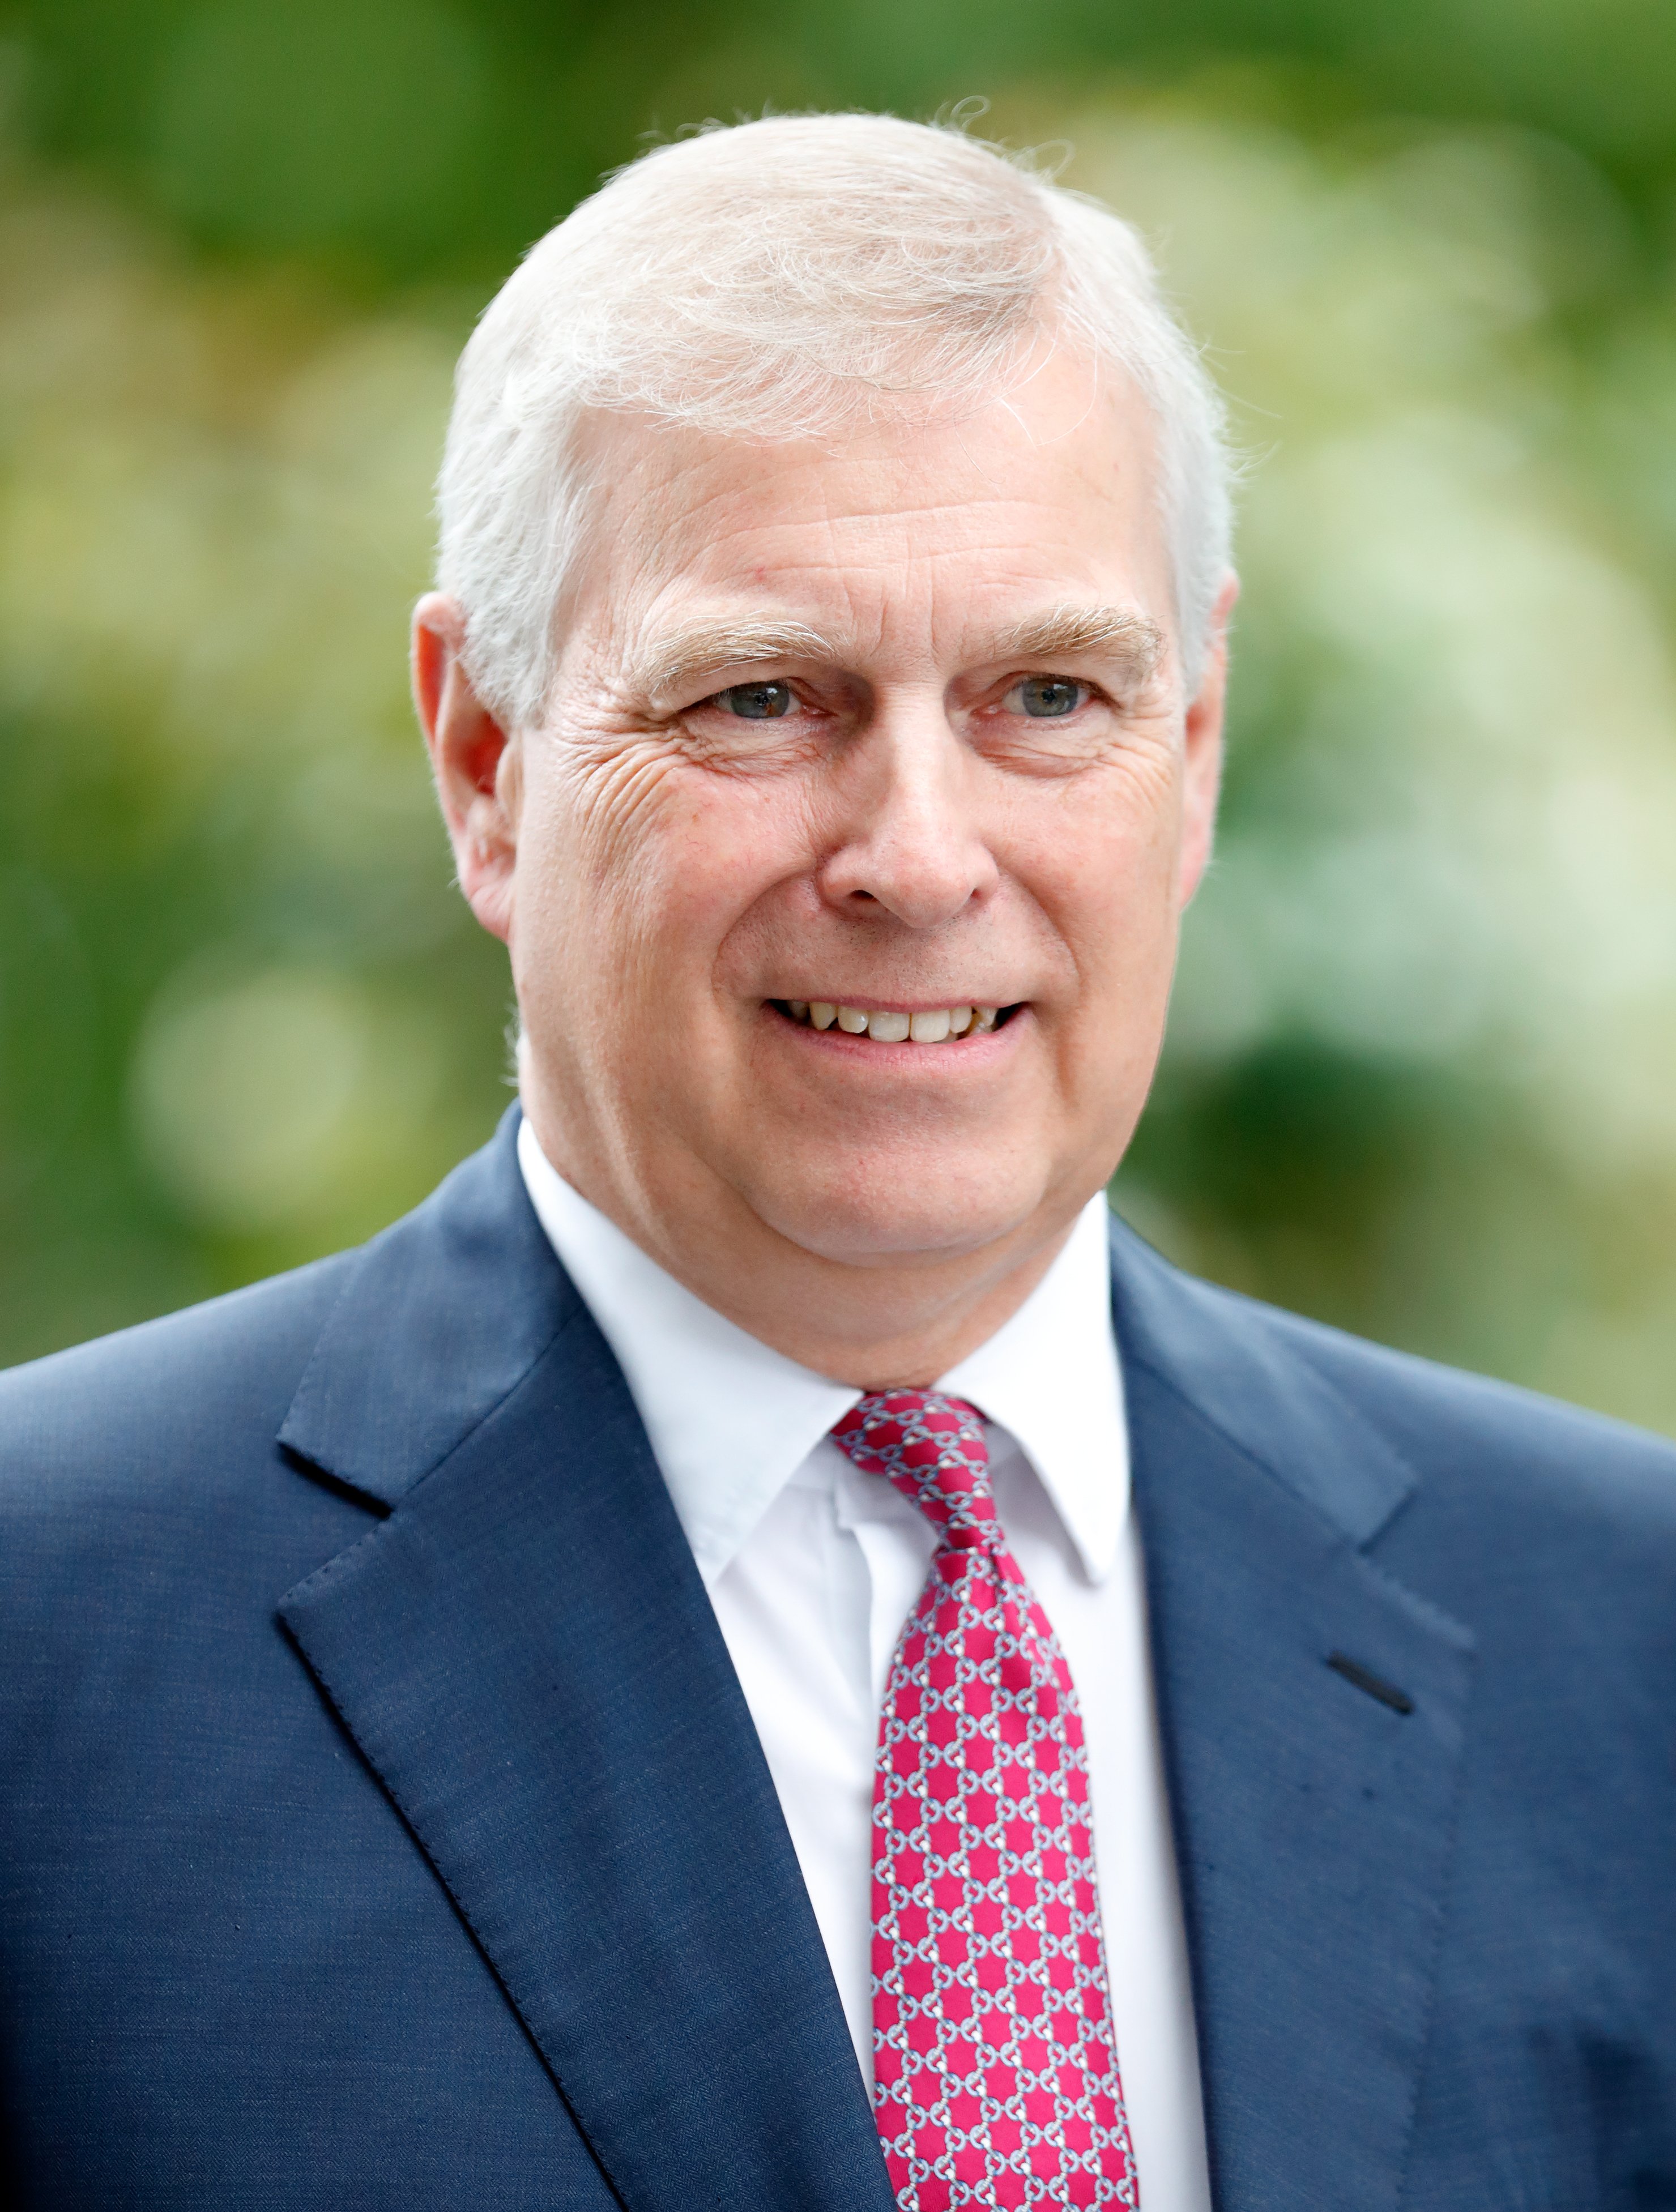 Prince Andrew, Duke of York attends the QIPCO King George Weekend at Ascot Racecourse on July 27, 2019 in Ascot, England. | Source: Getty Images